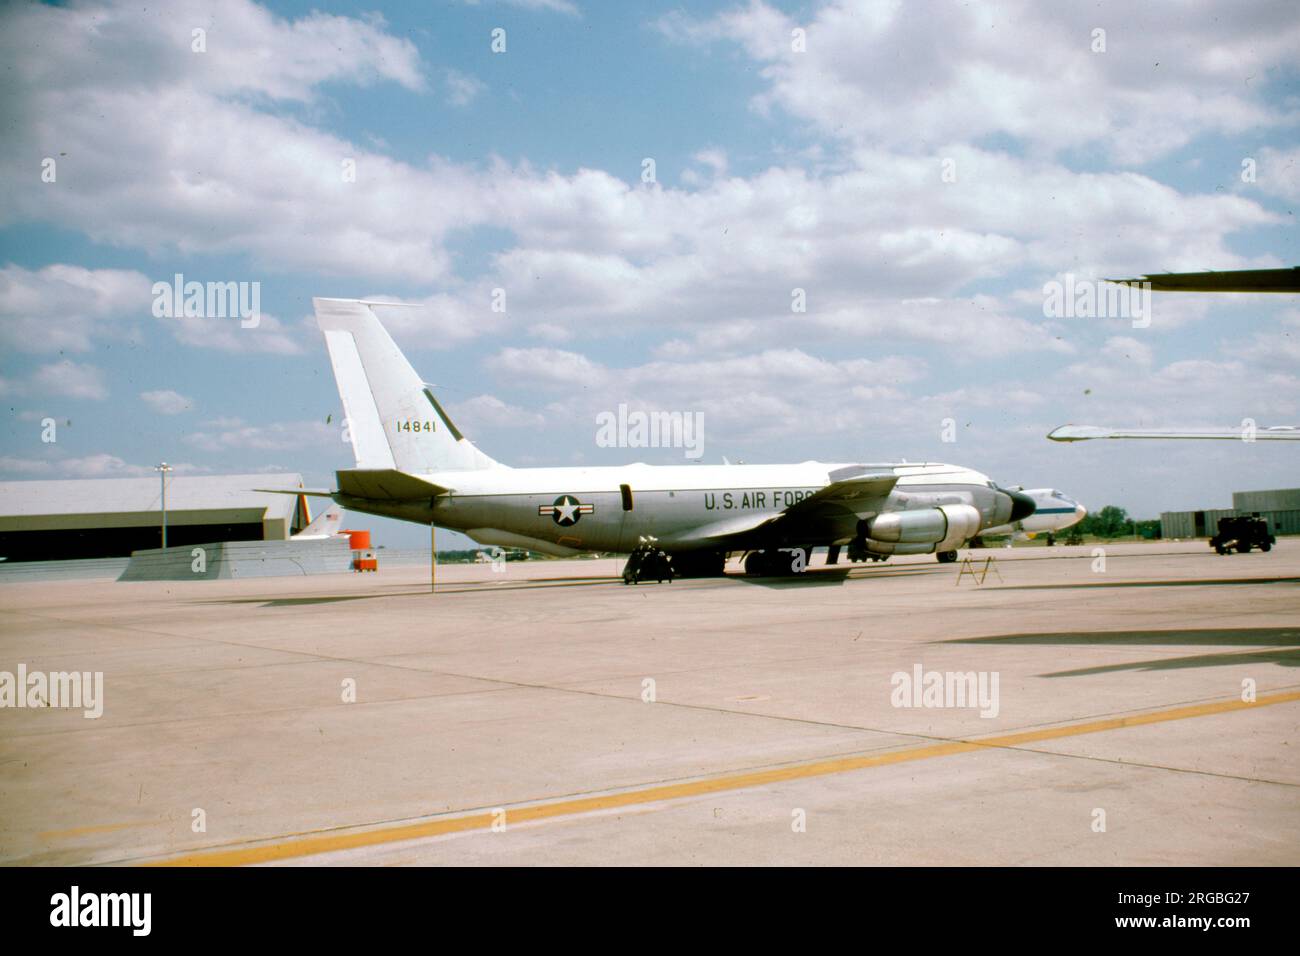 United States Air Force - Boeing RC-135C Big Team 64-14841 (msn 18781) Stock Photo